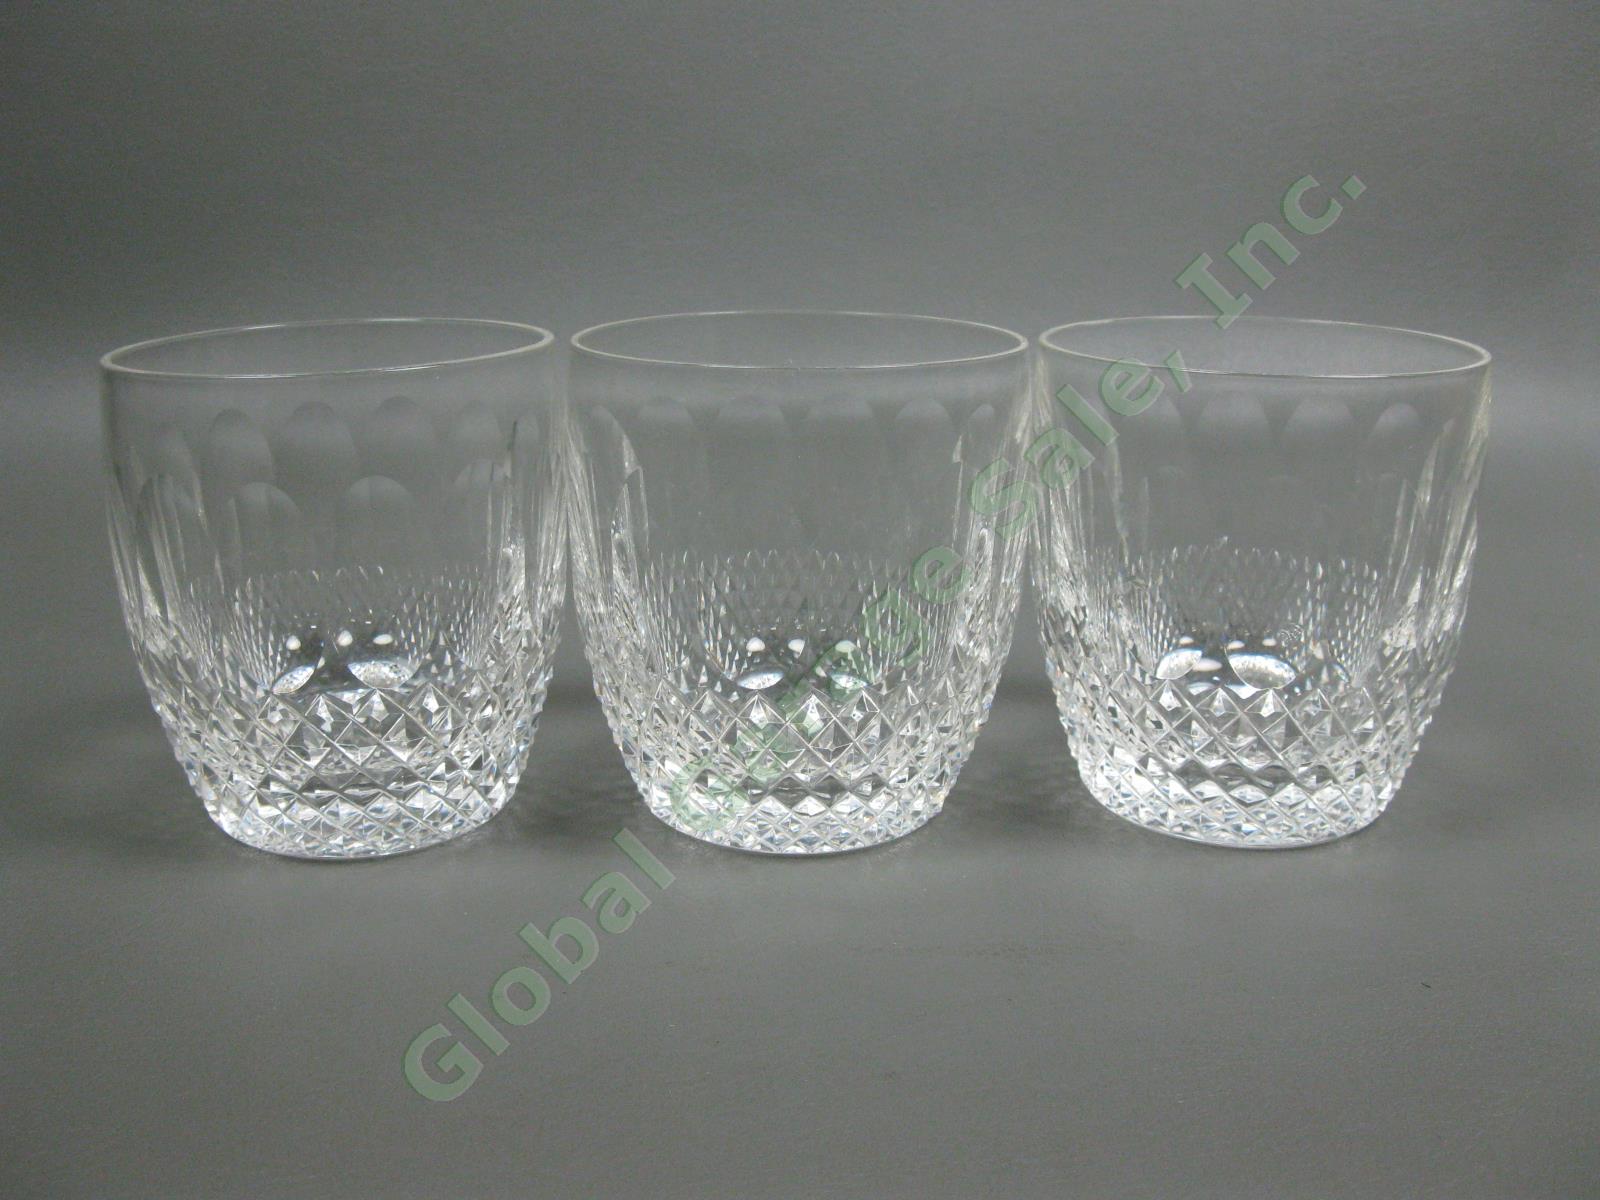 3 Waterford Crystal Colleen 9oz Water Tumbler Glasses Cut Hand-Blown Glass Set 1